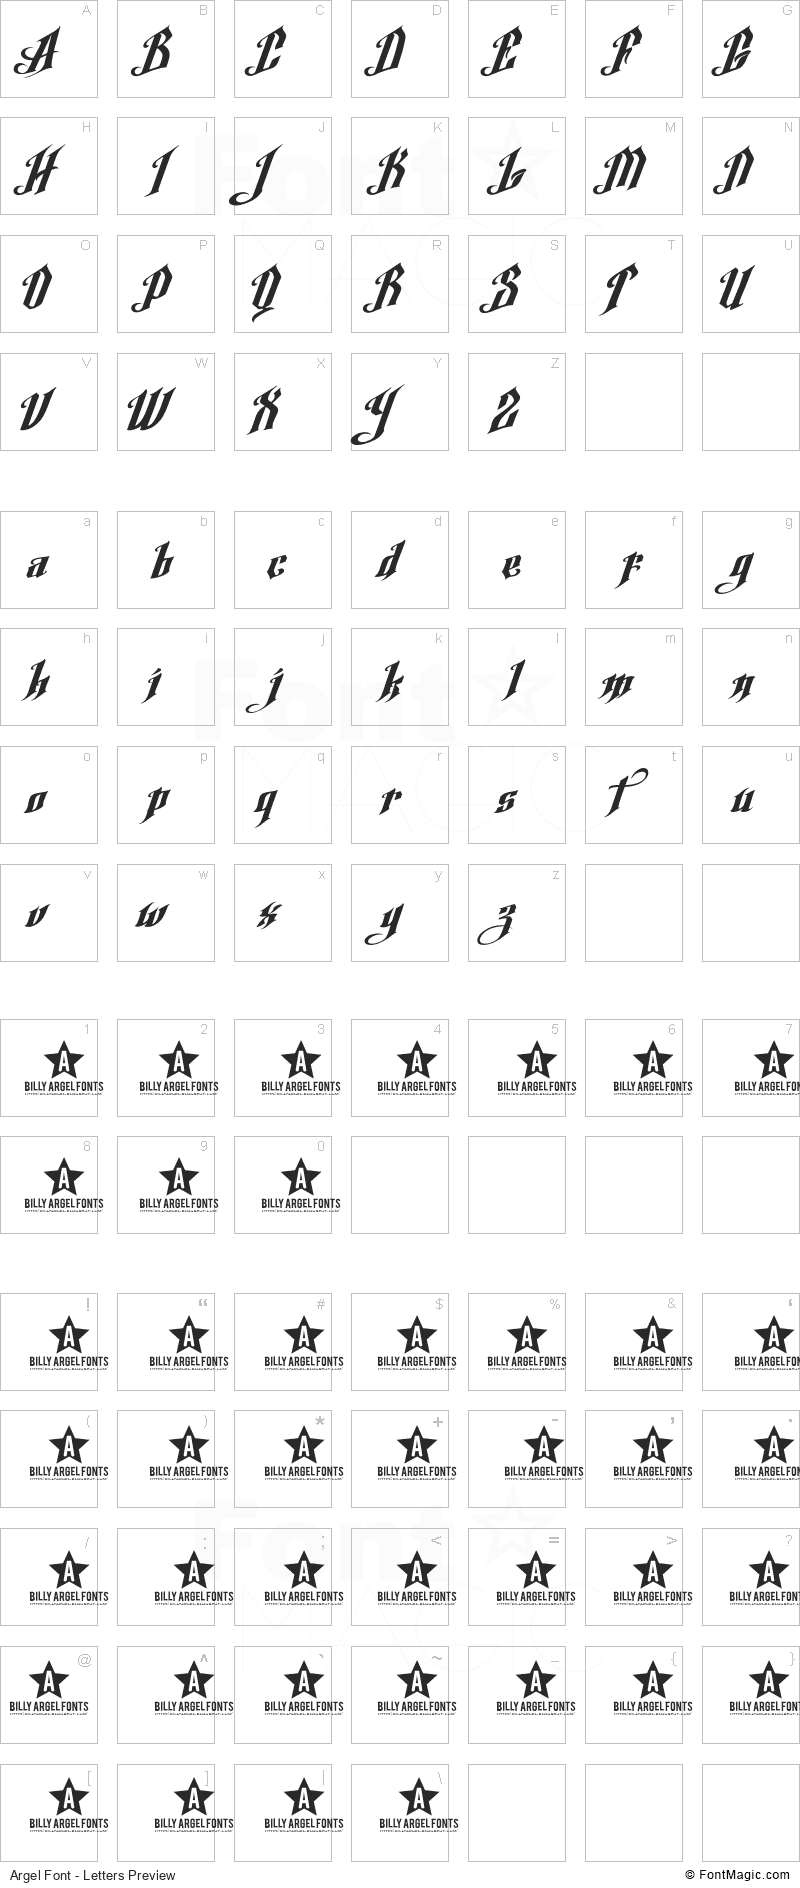 Argel Font - All Latters Preview Chart